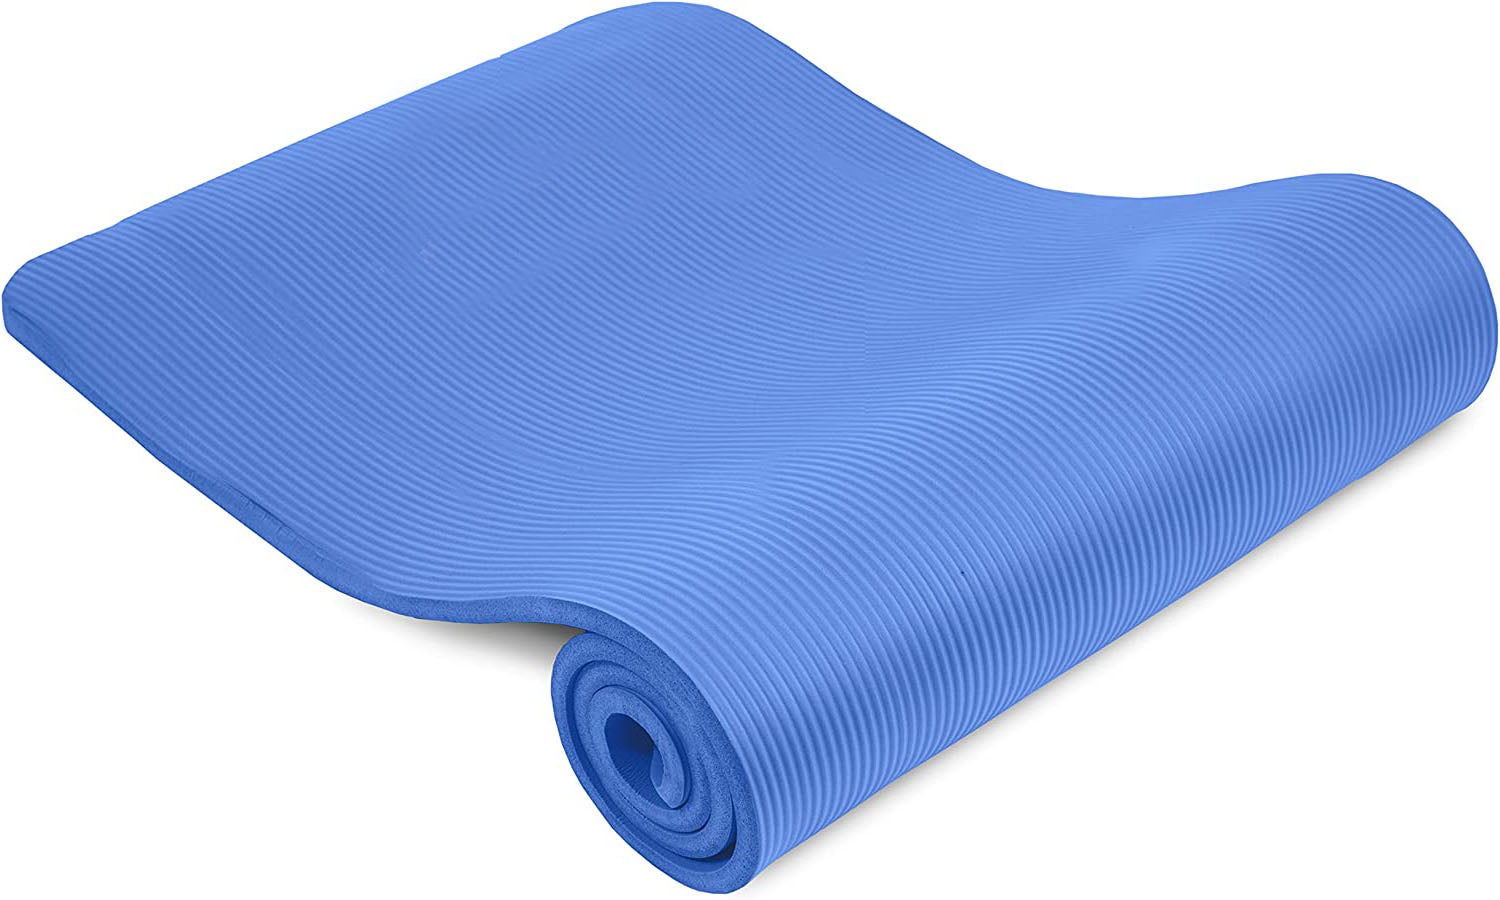 Extra long, Extra thick yoga mat - sporting goods - by owner - craigslist